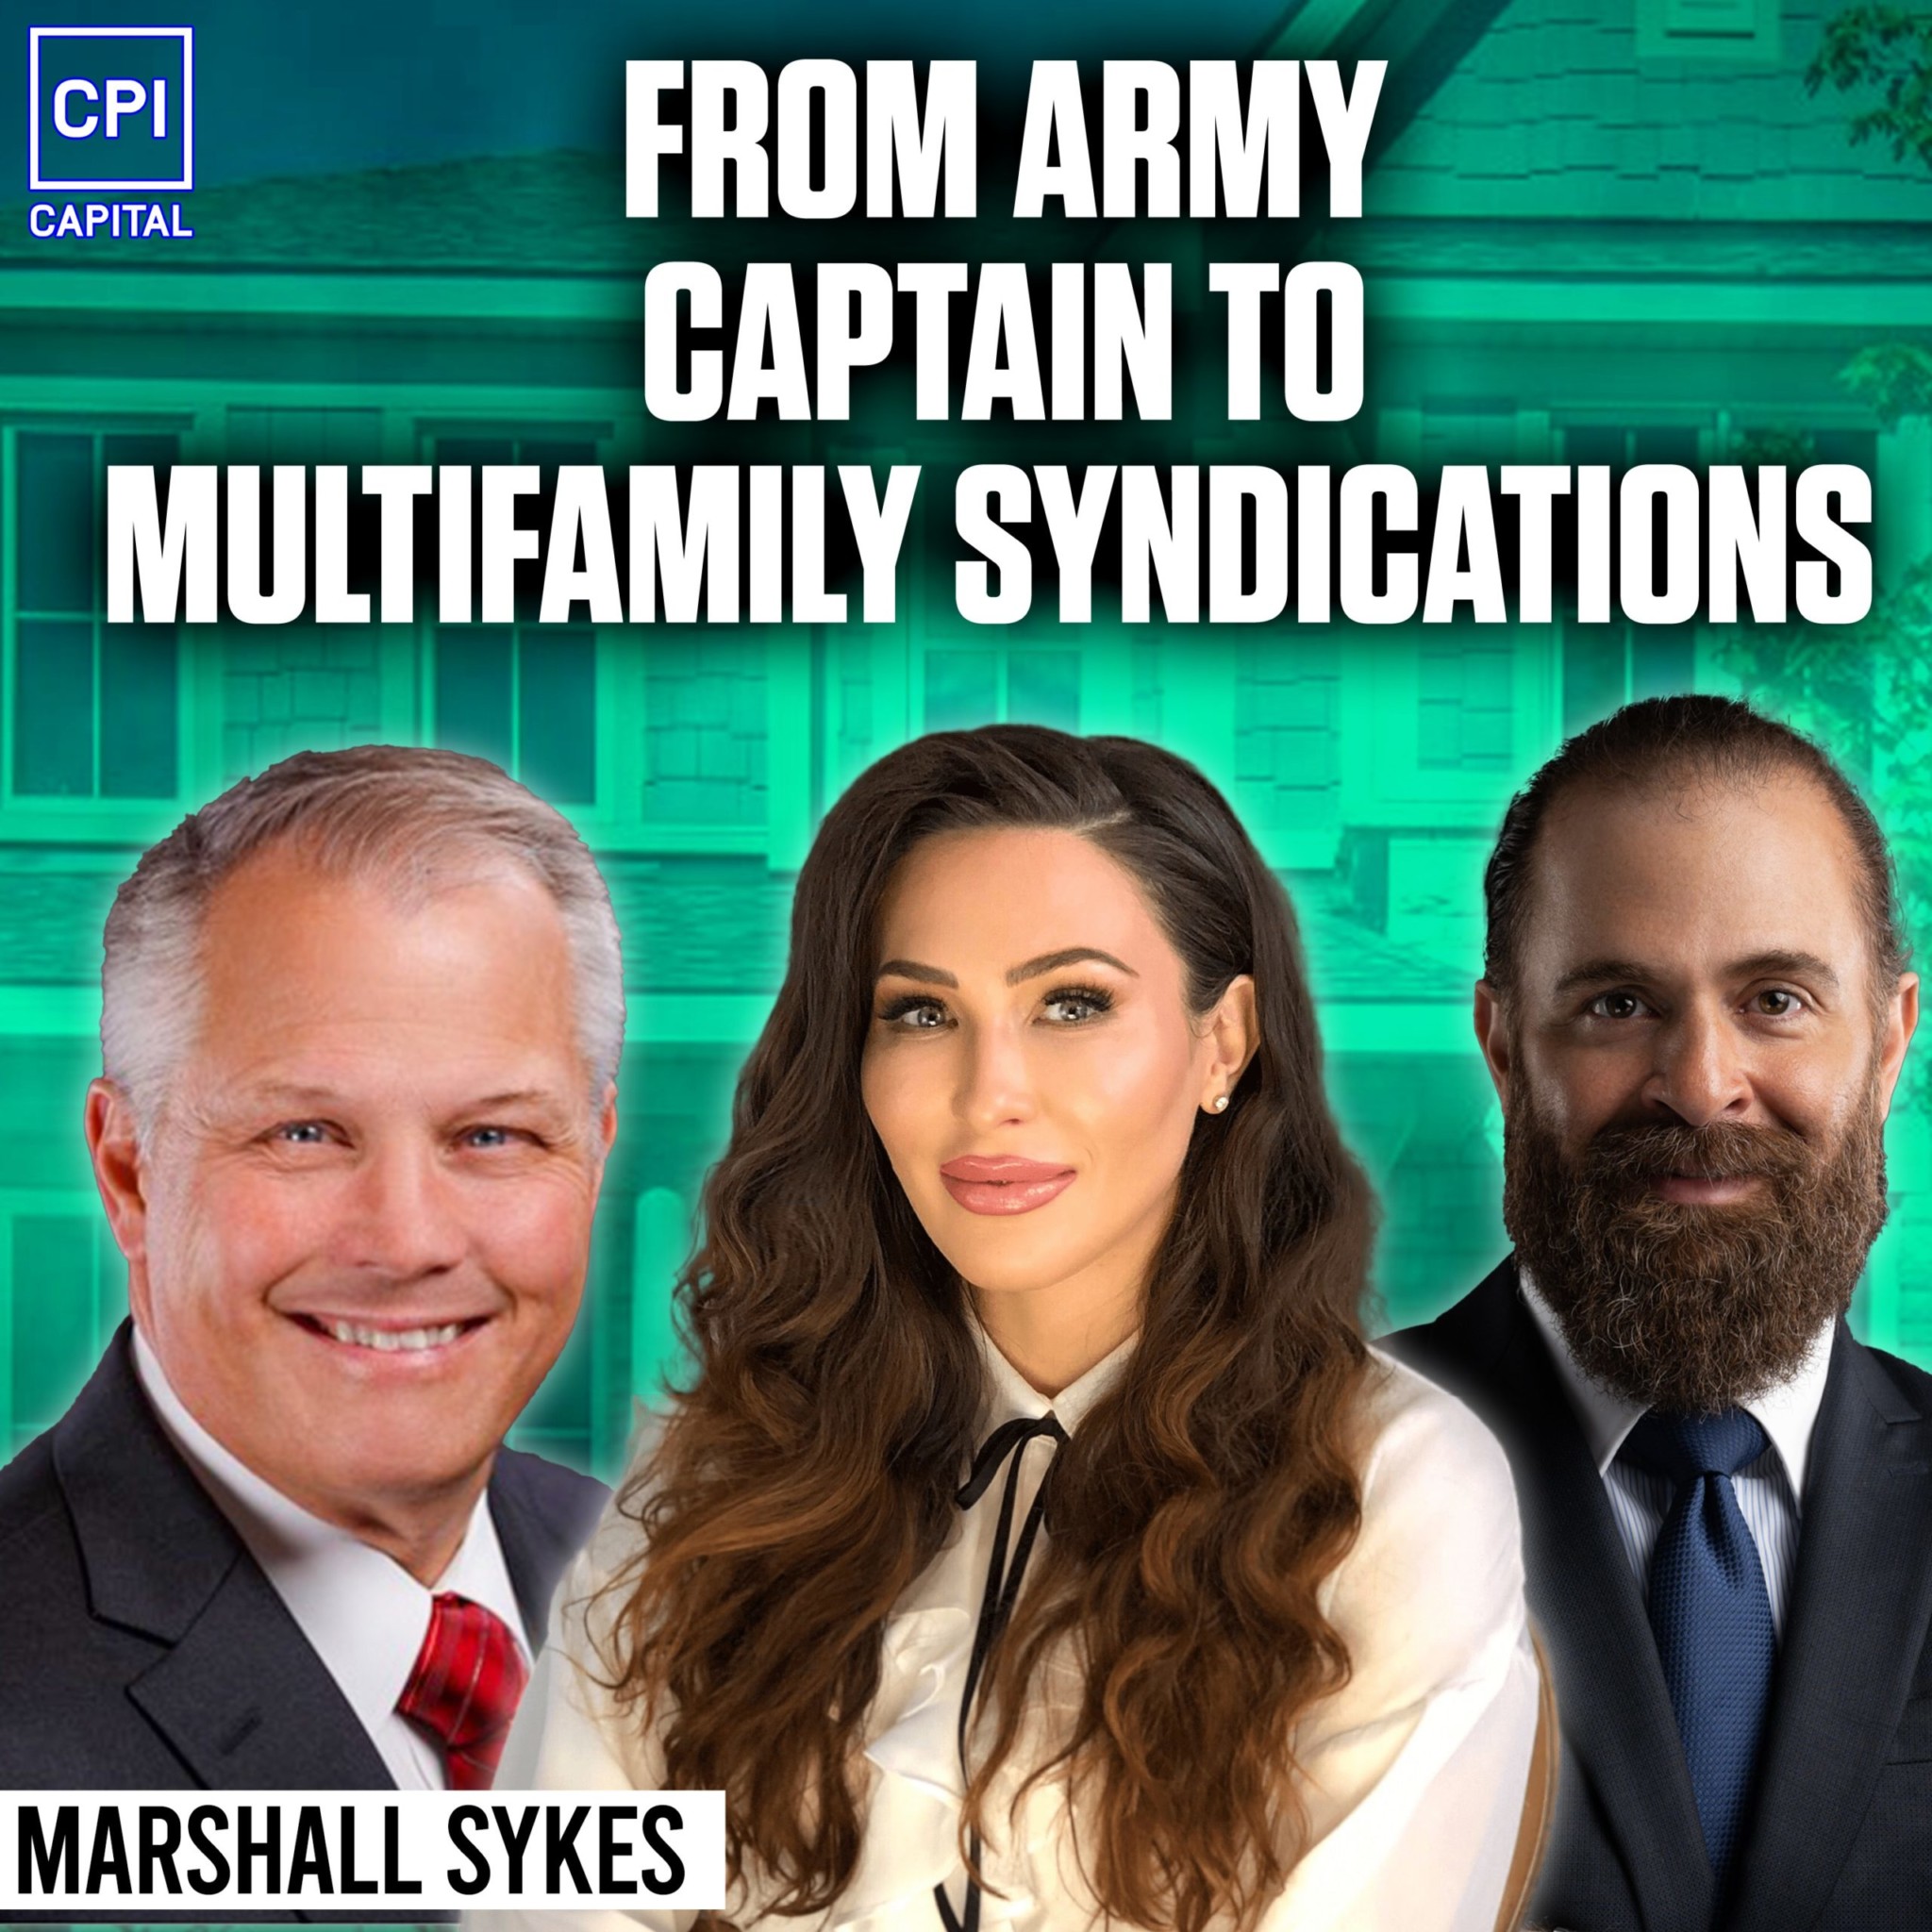 From An Army Captain To A Multifamily Syndicator – Marshall Sykes